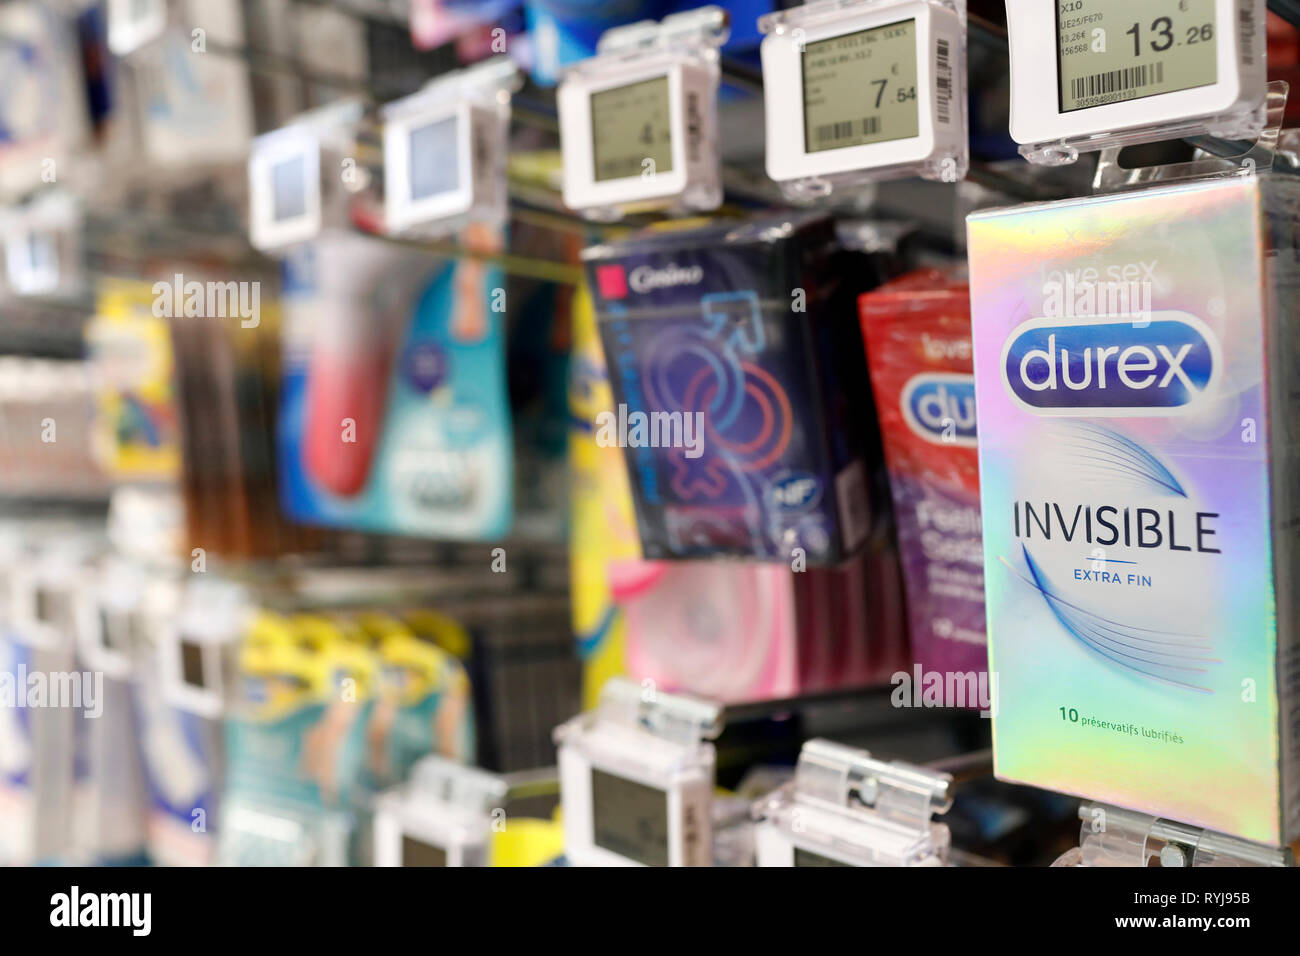 Stalls in row at supermarket.   Parapharmacy products. Condoms.  France. Stock Photo